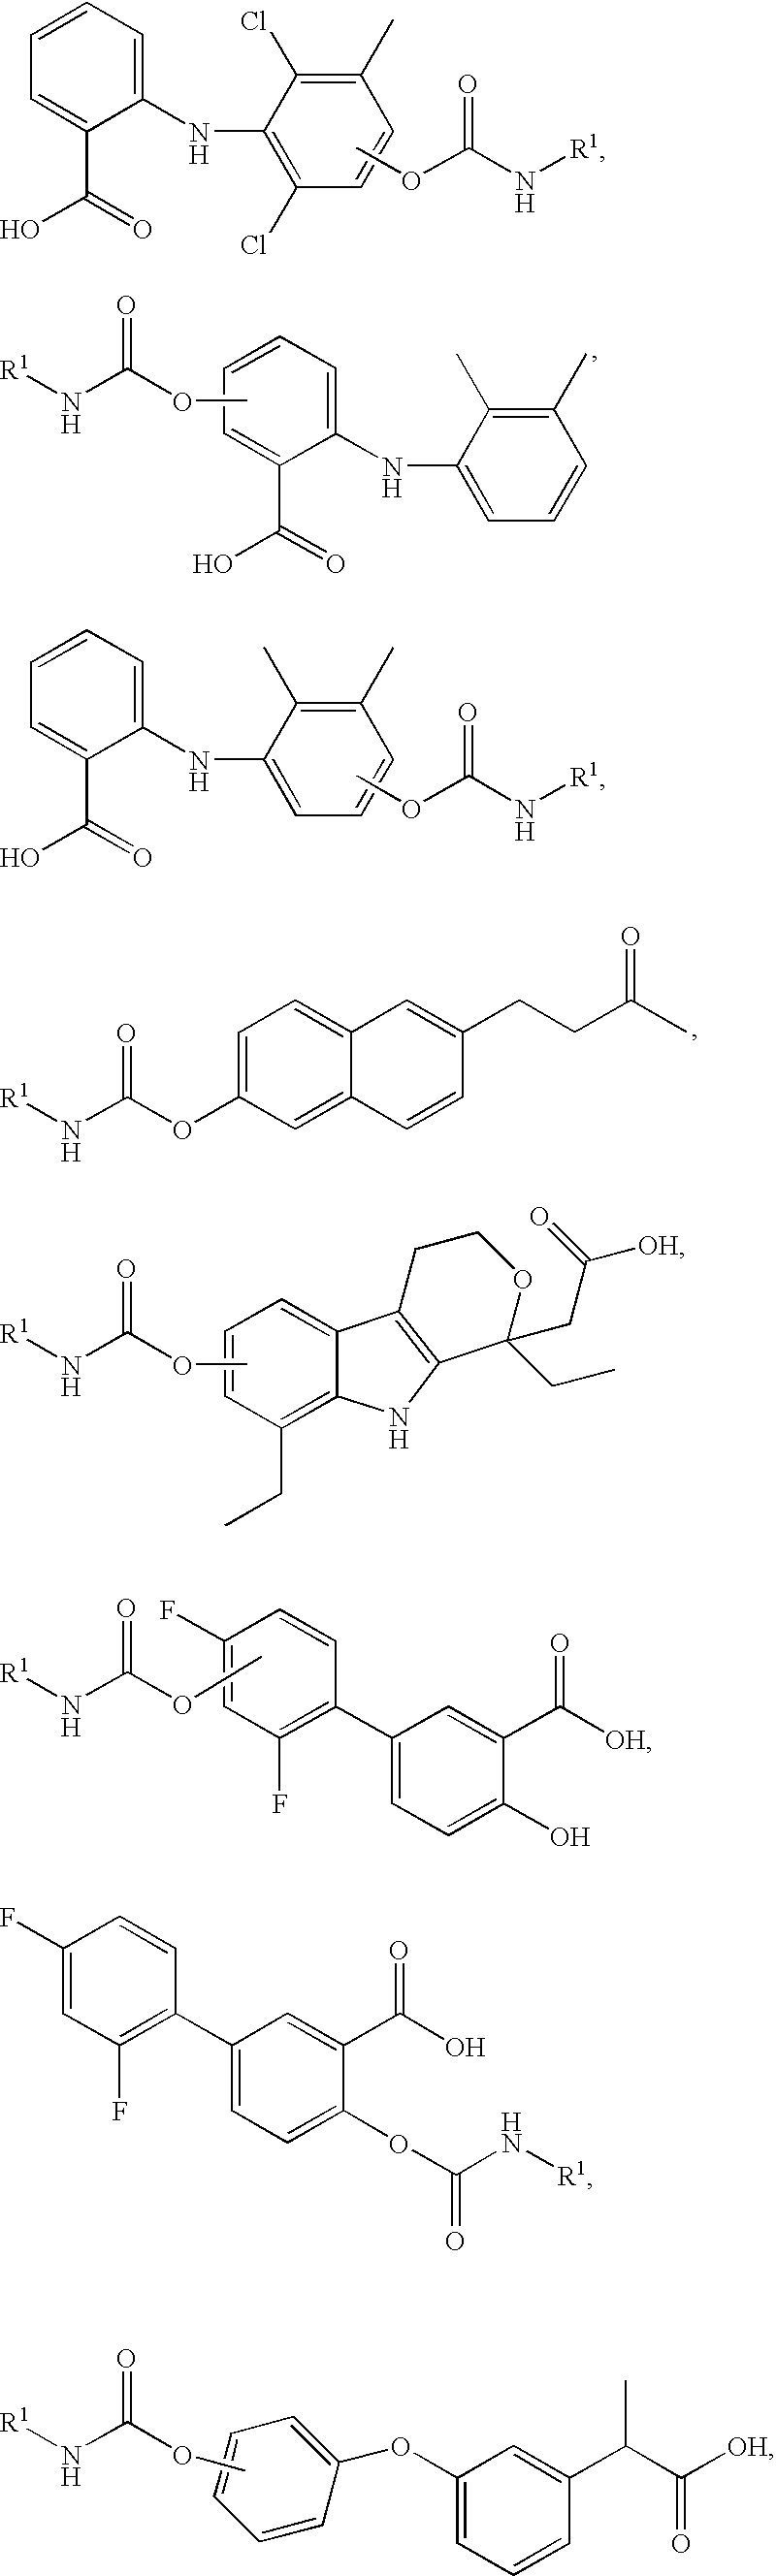 Combination faah inhibitor and analgesic, Anti-inflammatory or Anti-pyretic agent